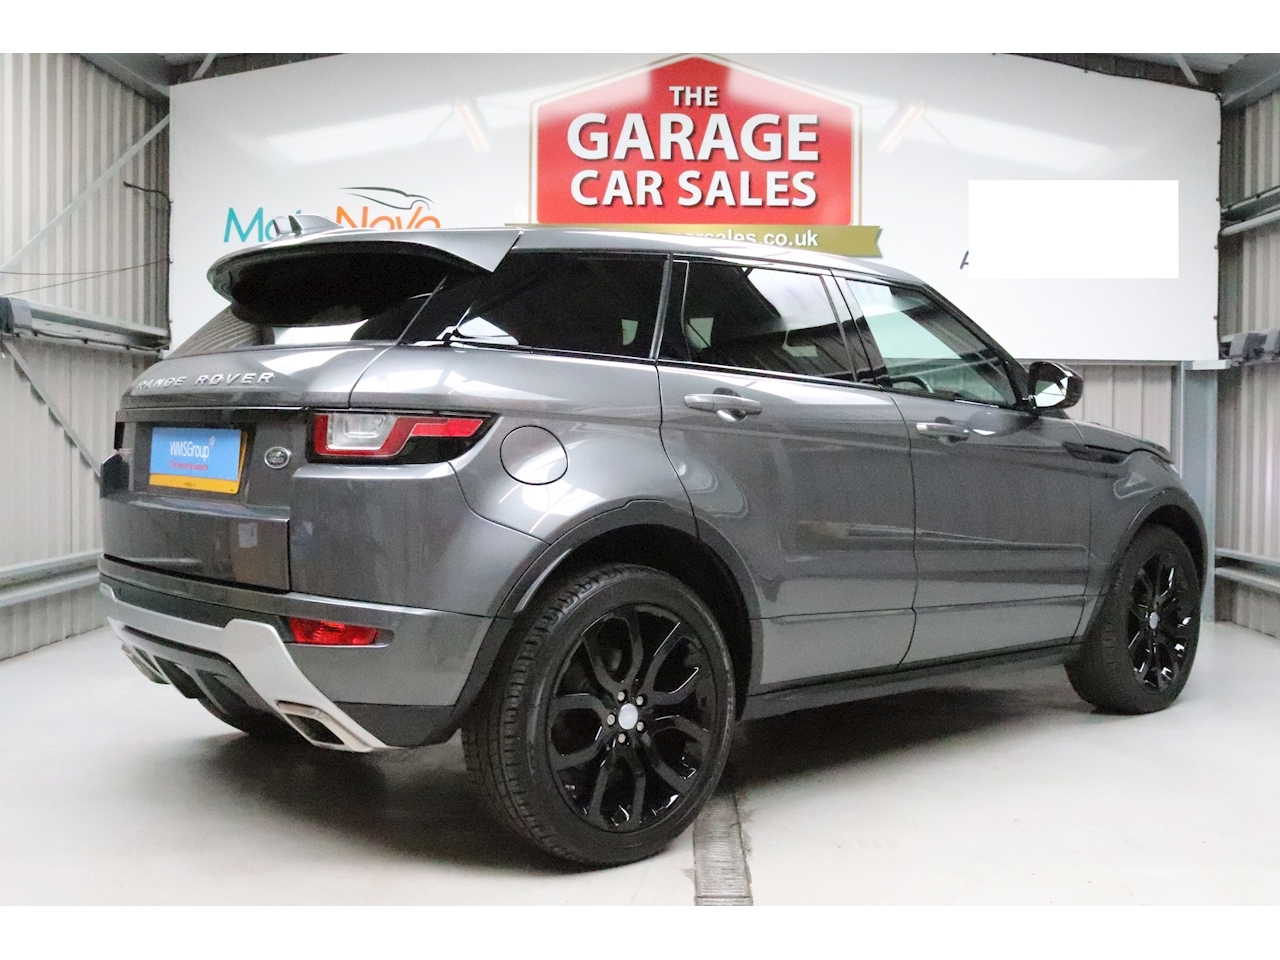 Range Rover Evoque Hse For Sale Uk  . View 130 Used Land Rover Range Rover Evoque Hse Cars For Sale Starting At $23,500.